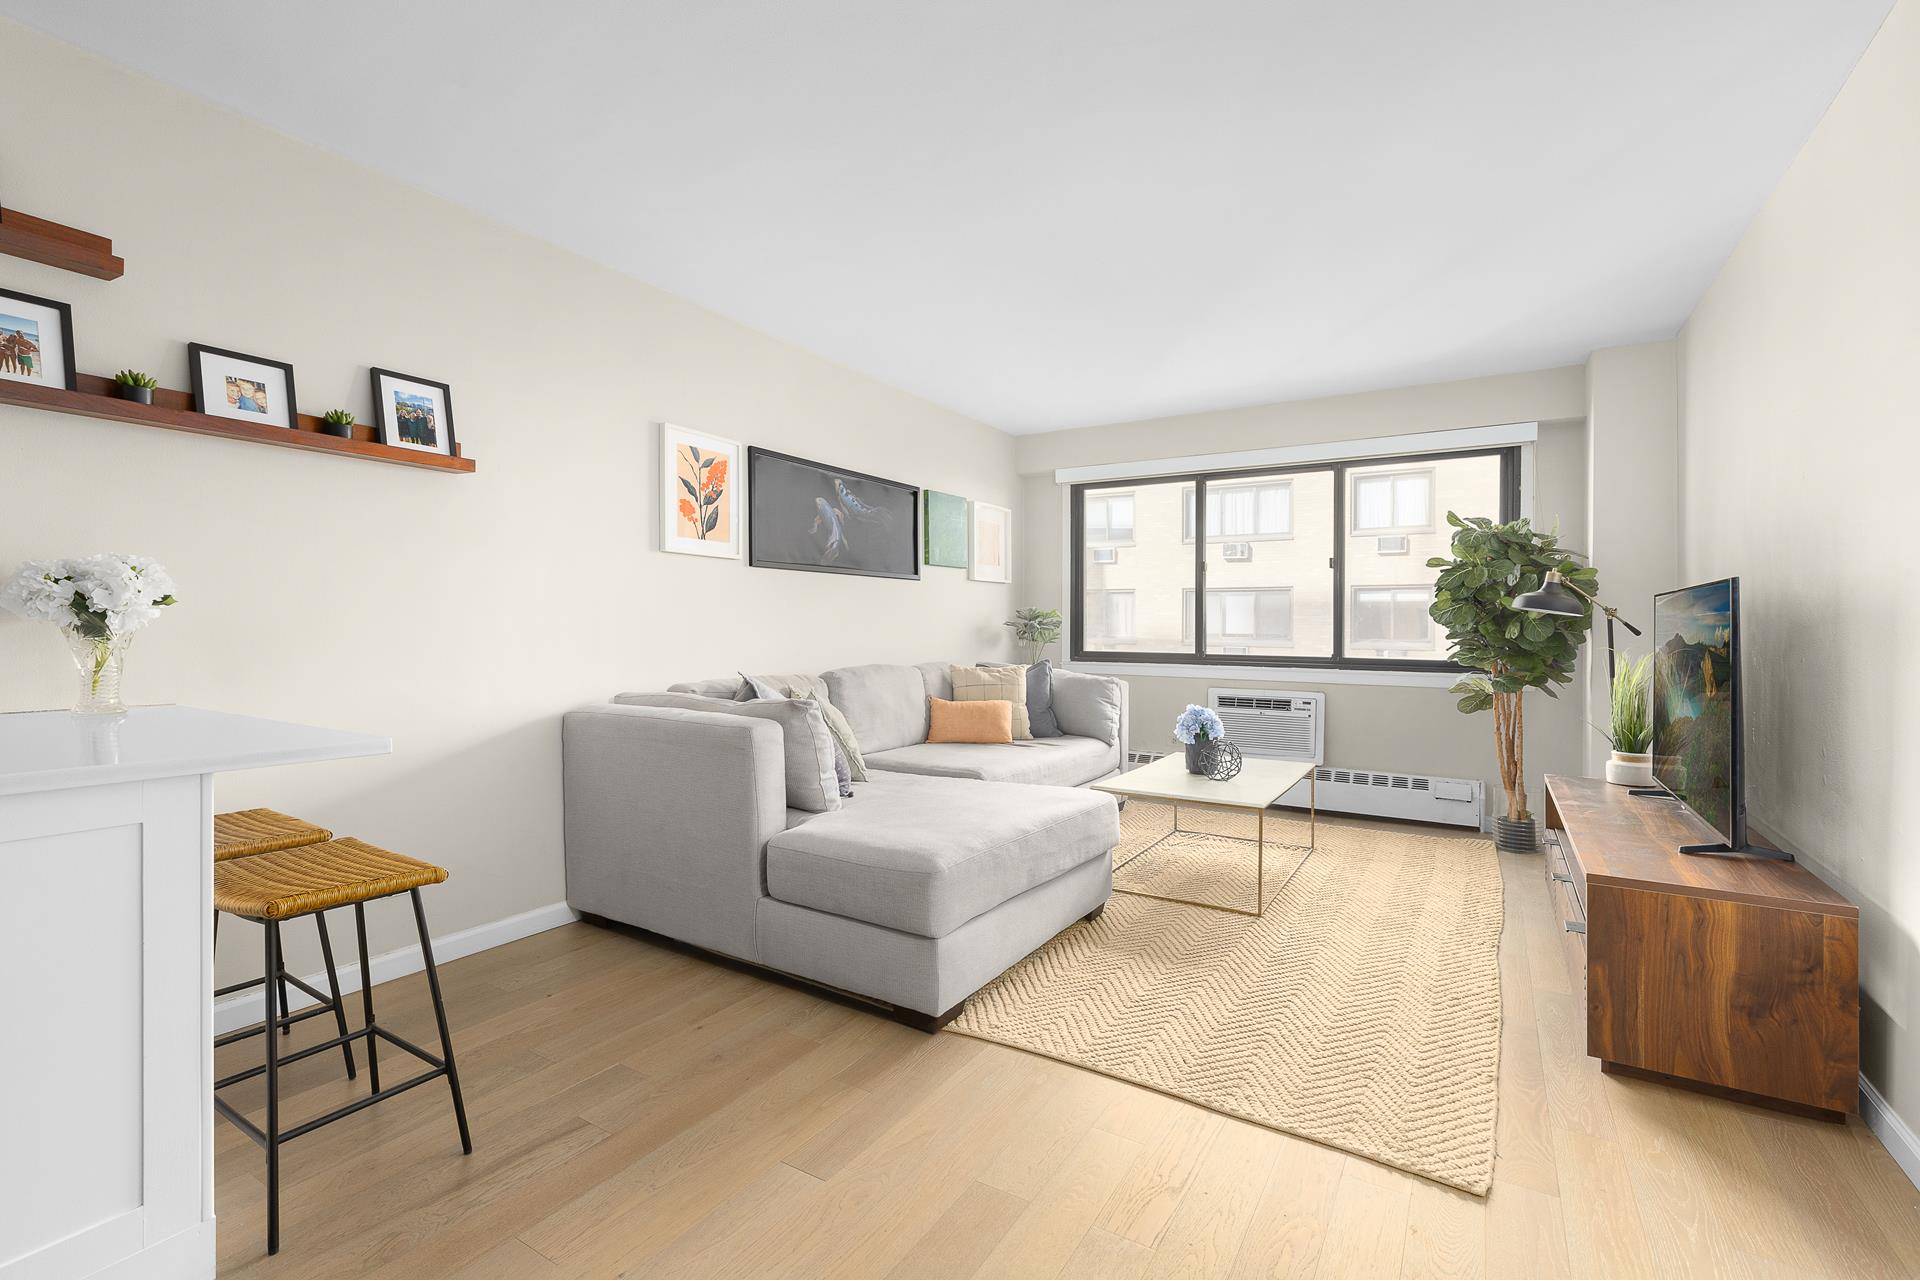 Apartment 11HS at The Chelsea Lane is a mint condition full size 1 bed 1 bath located in the heart of the Flatiron neighborhood.